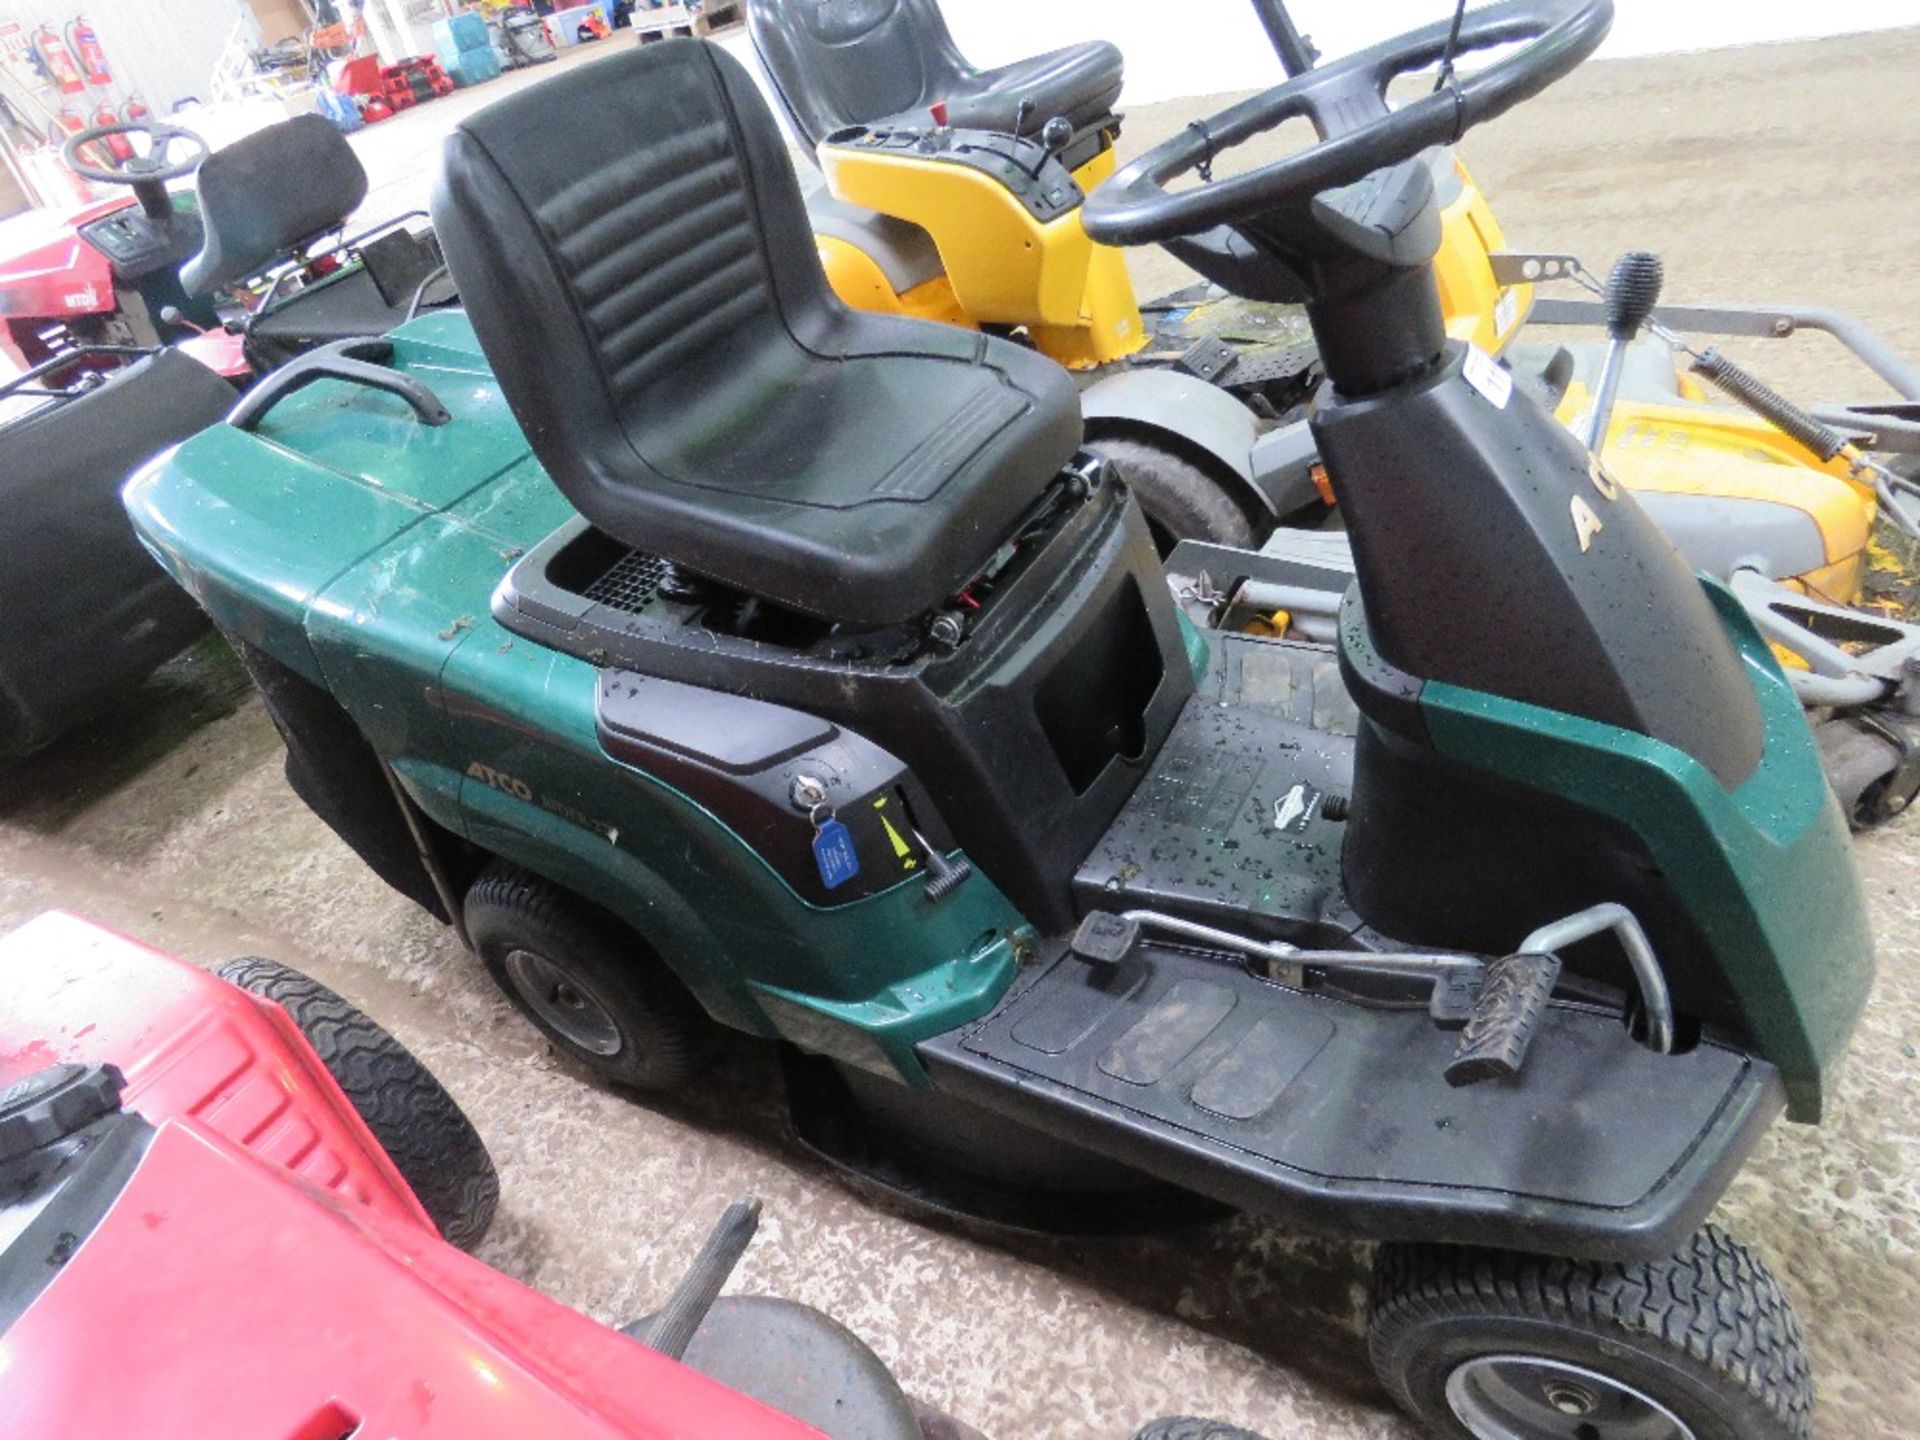 ATCO RIDER RIDE ON MOWER WITH COLLECTOR. WHEN BRIEFLY TESTED WAS SEEN TO RUN, DRIVE AND MOWERS ENGAG - Image 2 of 6